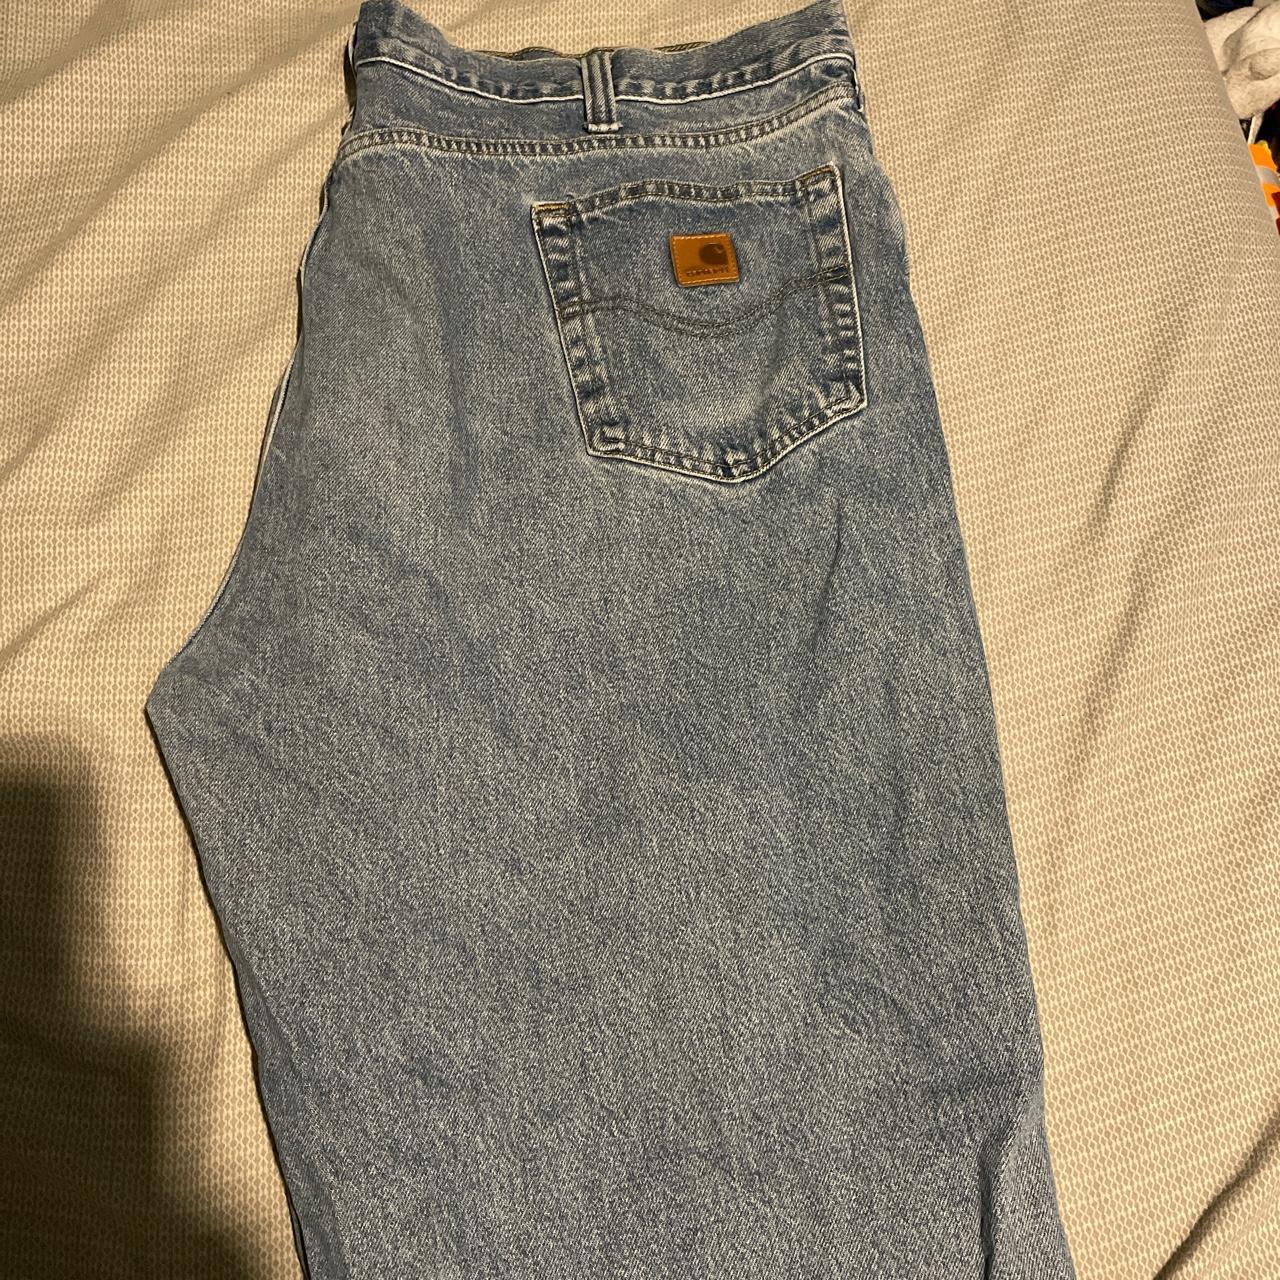 Very Oversized and Baggy Carhartt Jeans in Extremely... - Depop